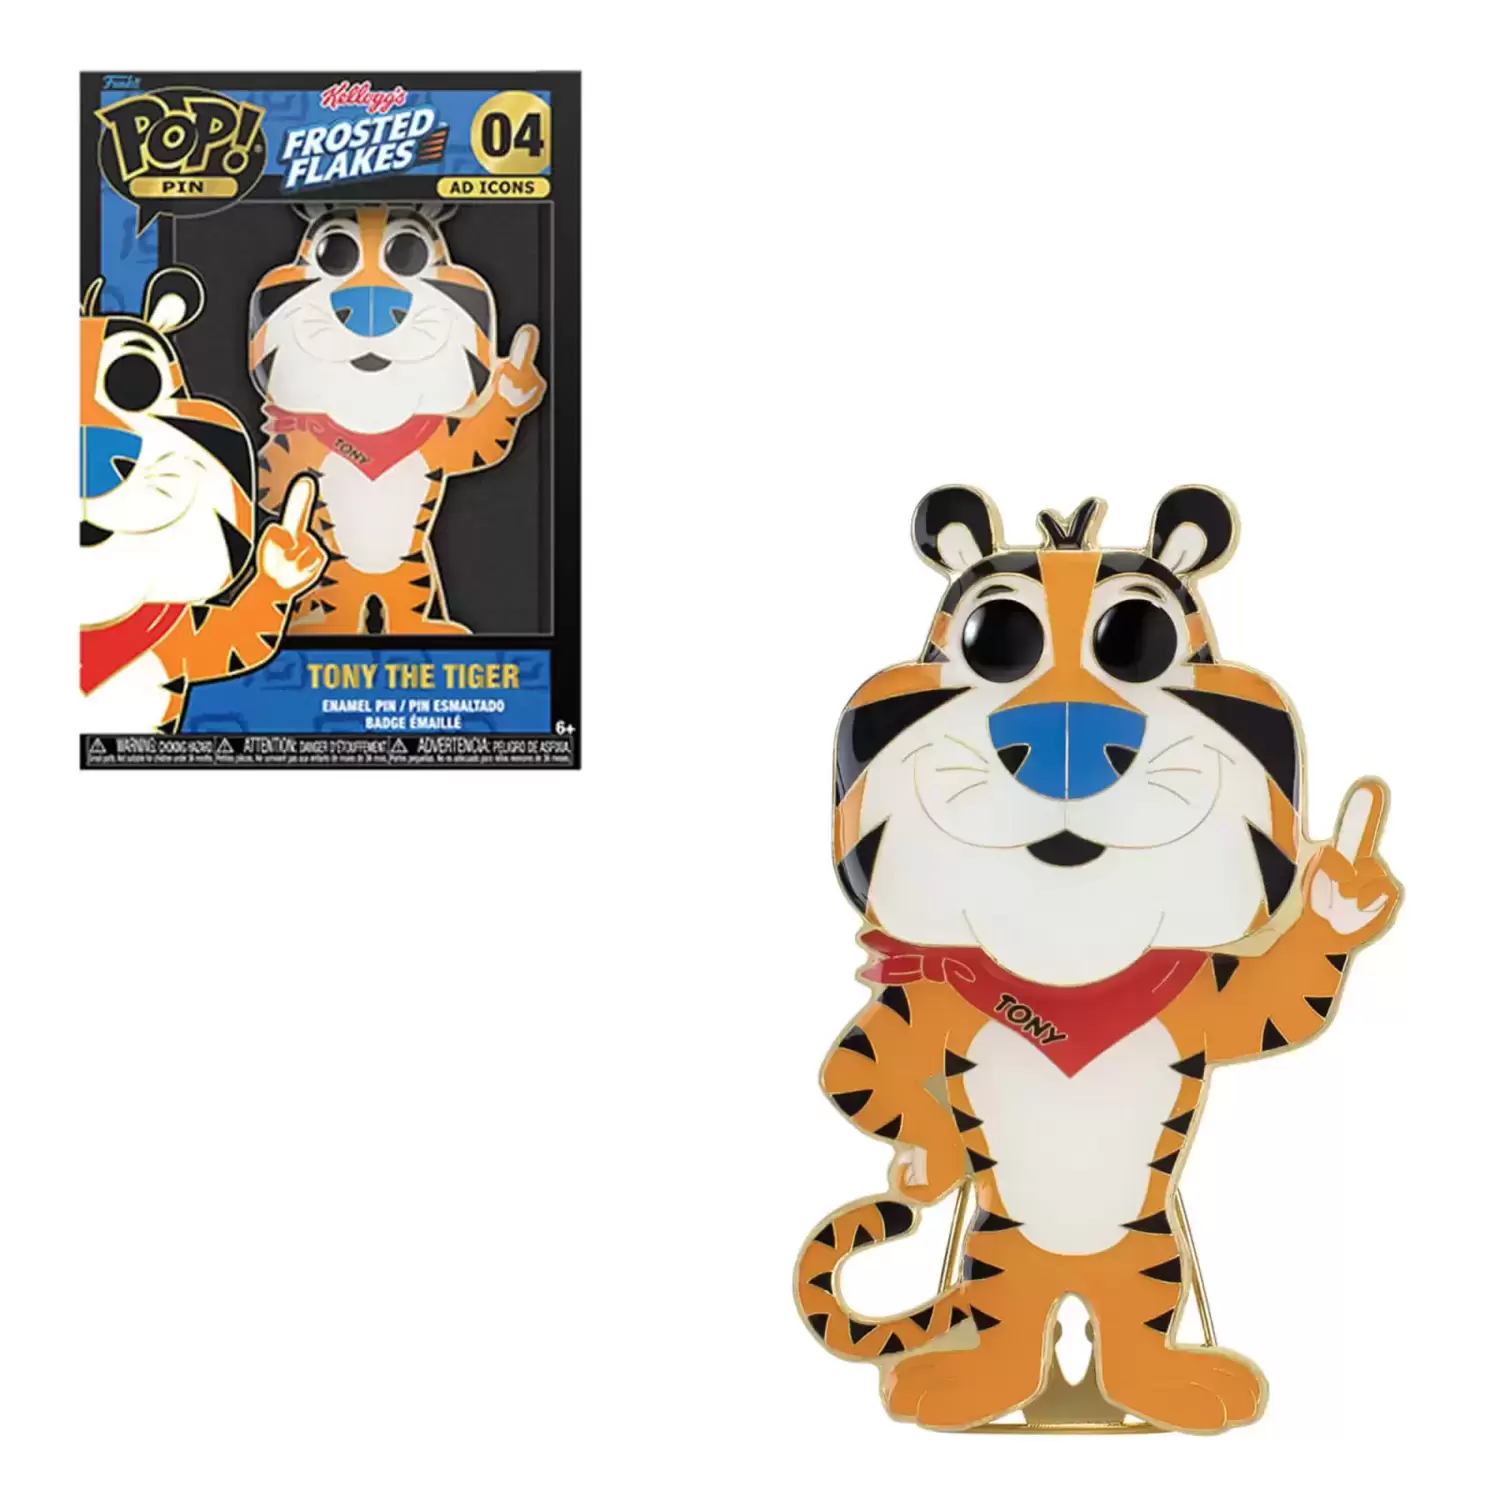 POP! Pin Ad Icons - Frosted Flakes Tony The Tiger